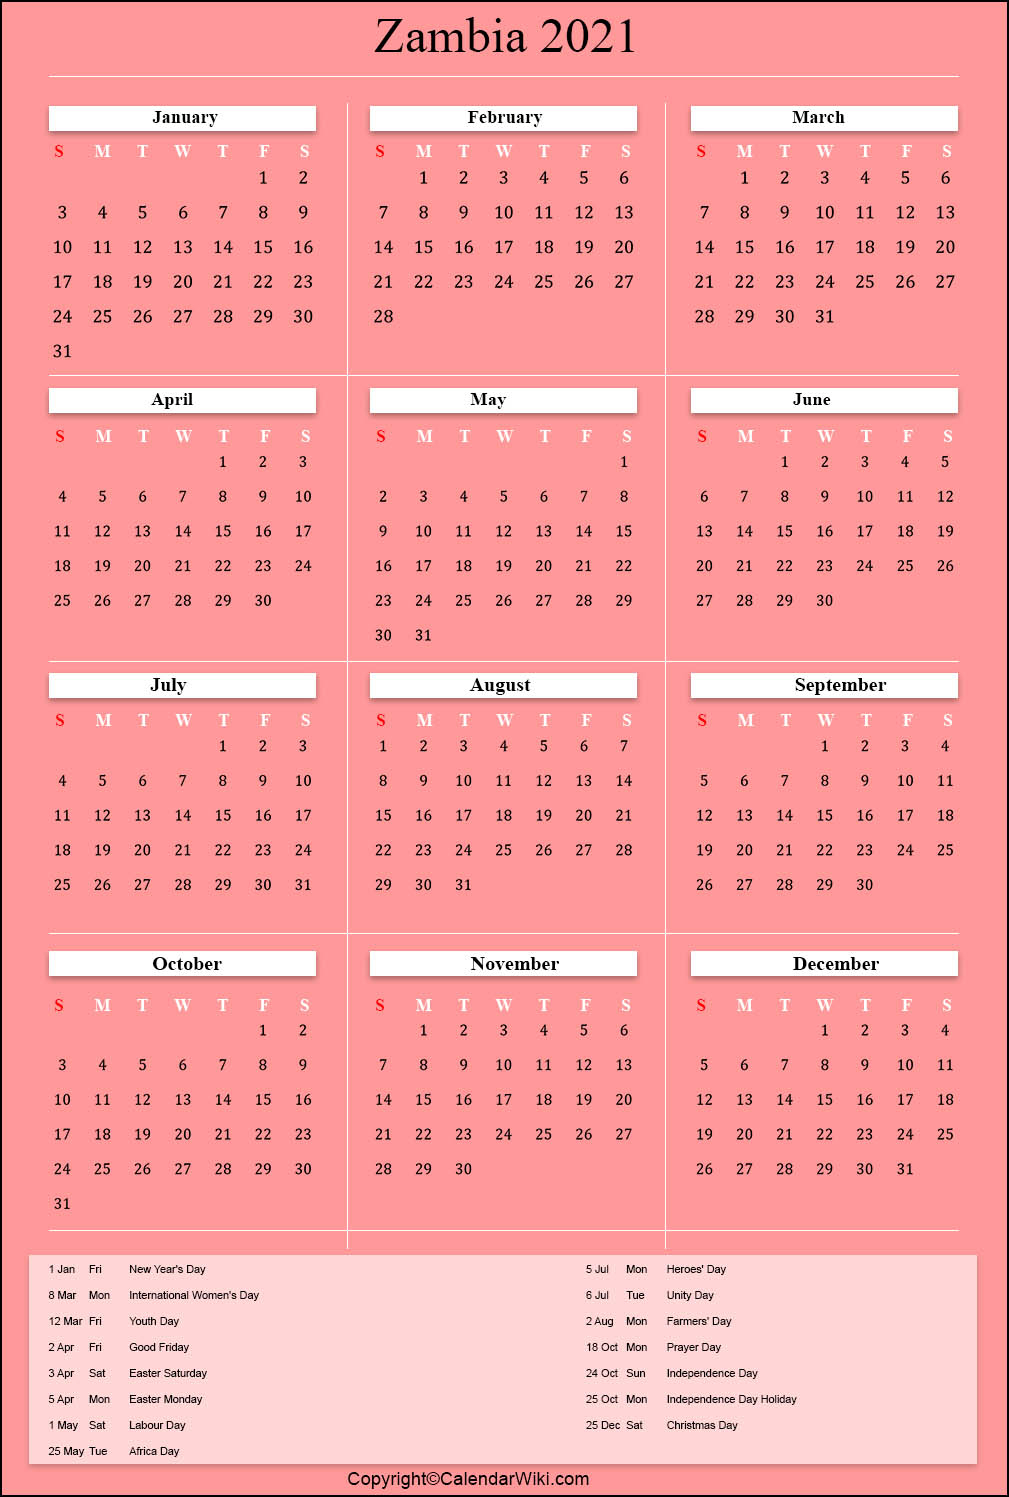 Printable Zambia Calendar 2021 With Holidays [Public Holidays] within Calendar 2021 With Holidays